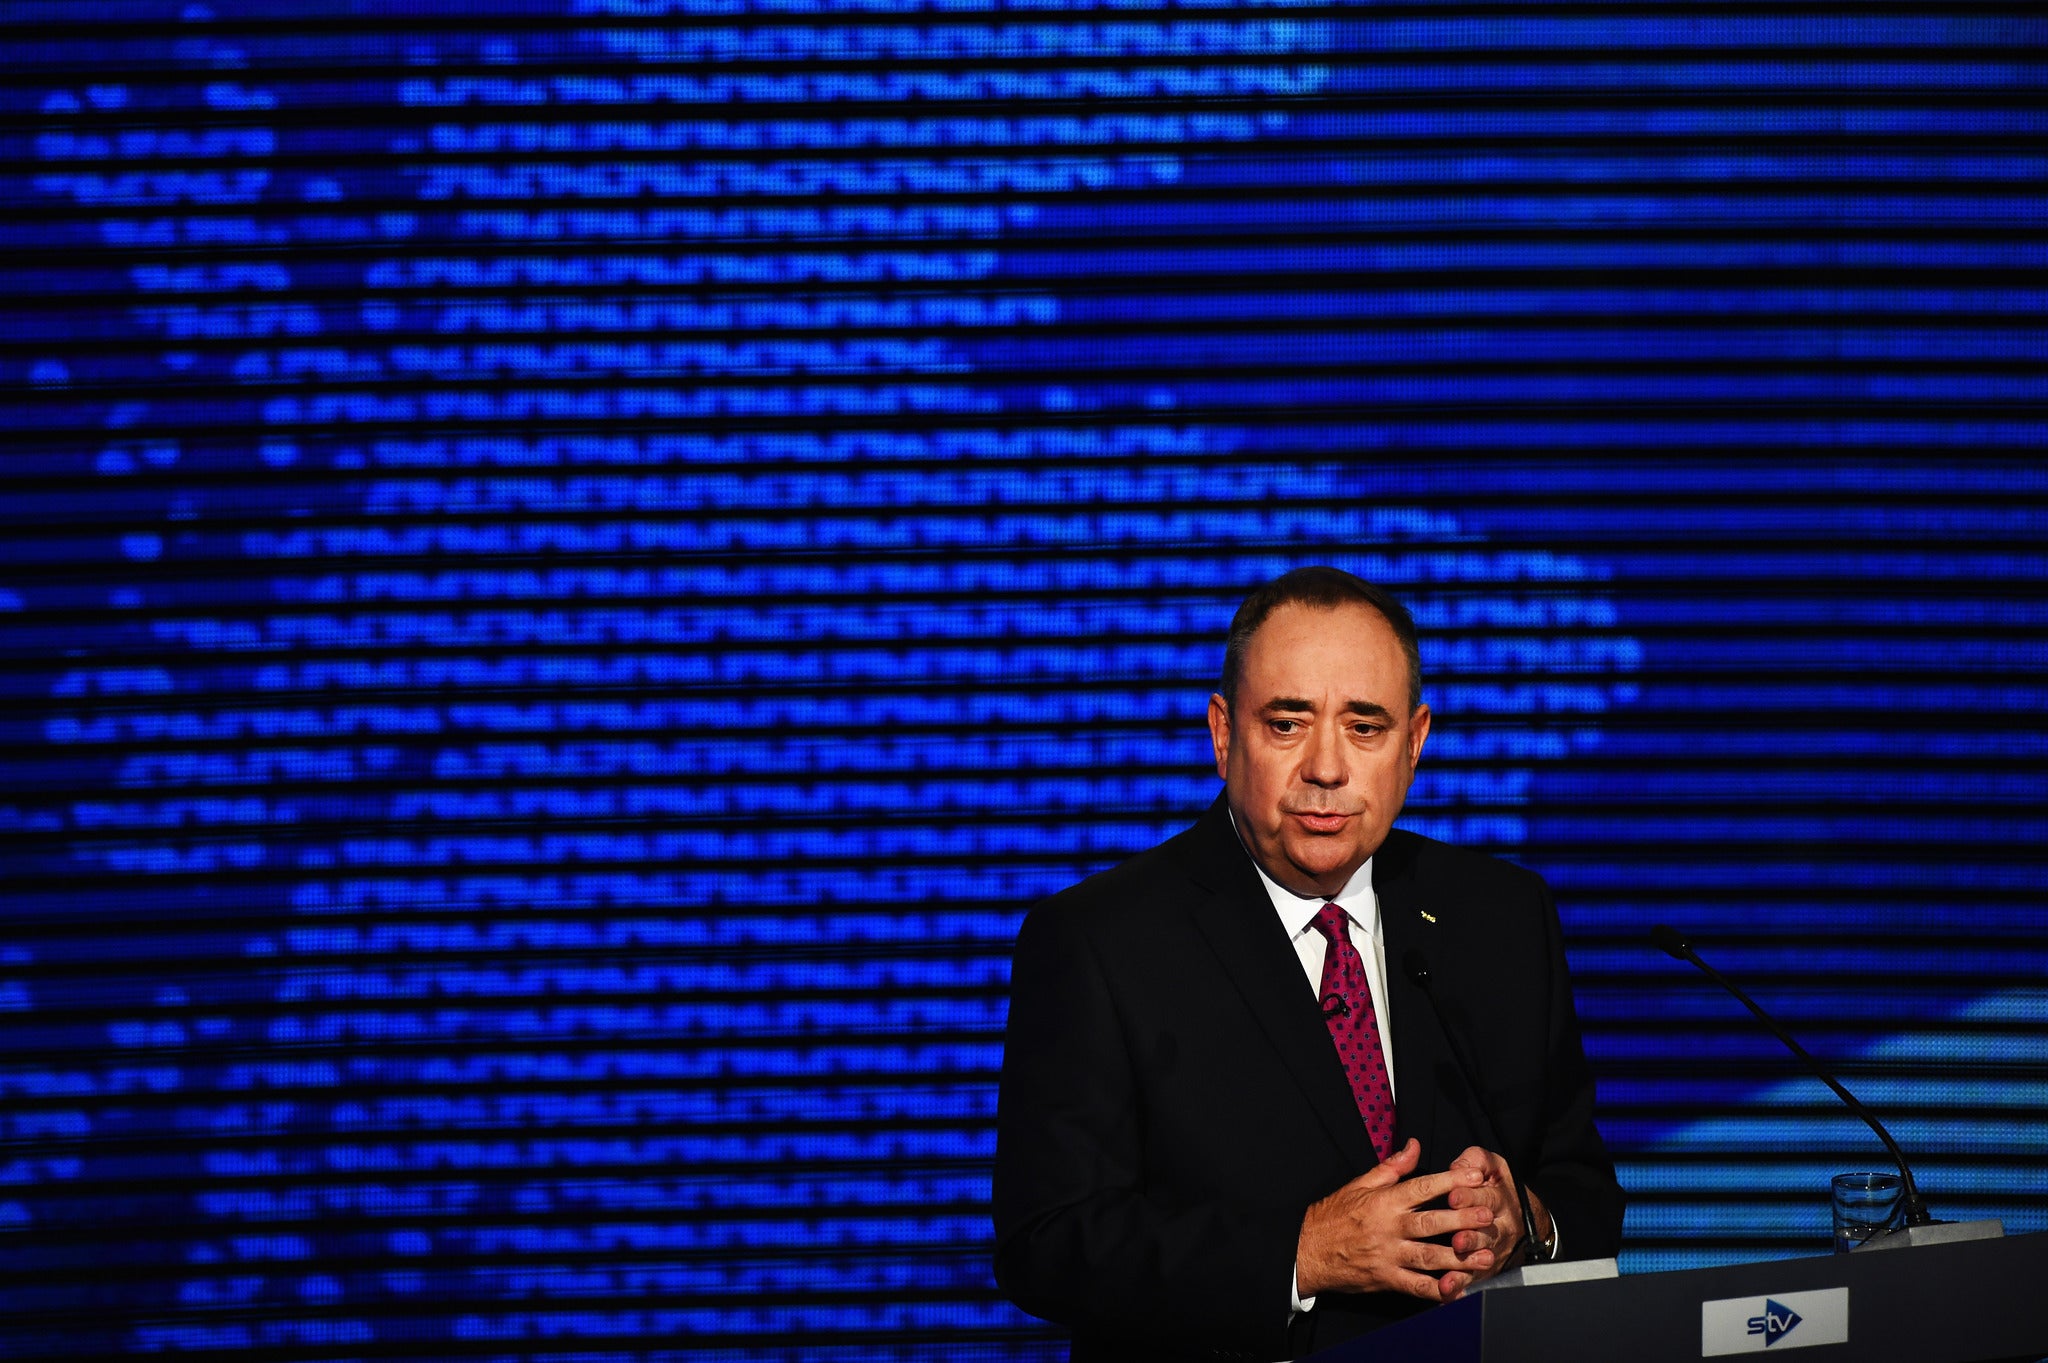 Scotland's First Minister Alex Salmond is "arrogant, ambitious and dishonest" according to a survey of women